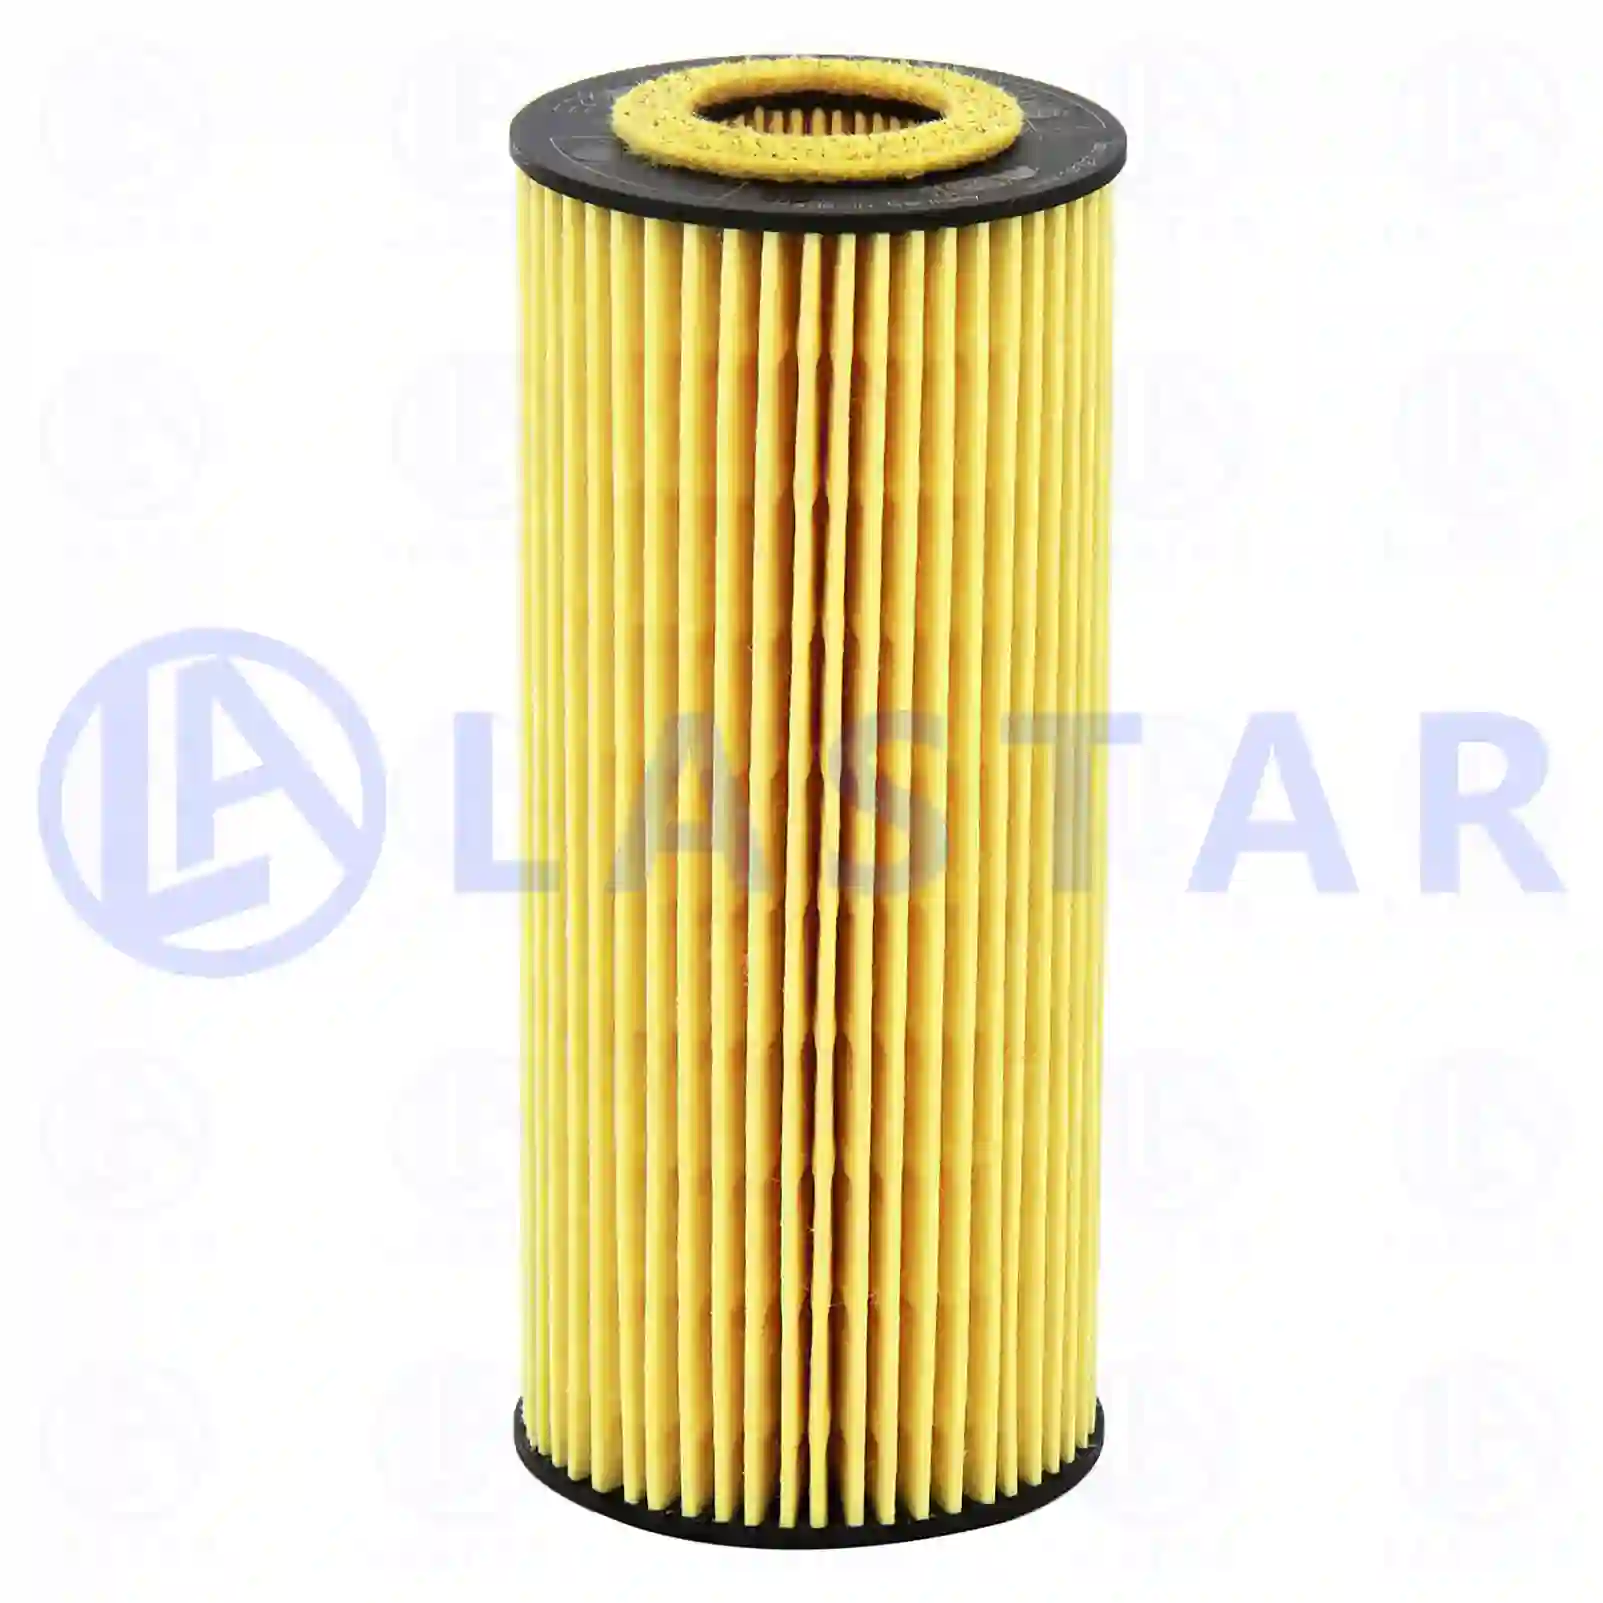 Gearbox Filter Kit Oil filter insert, gearbox, la no: 77731622 ,  oem no:1521527, 22023120, ZG02433-0008, Lastar Spare Part | Truck Spare Parts, Auotomotive Spare Parts